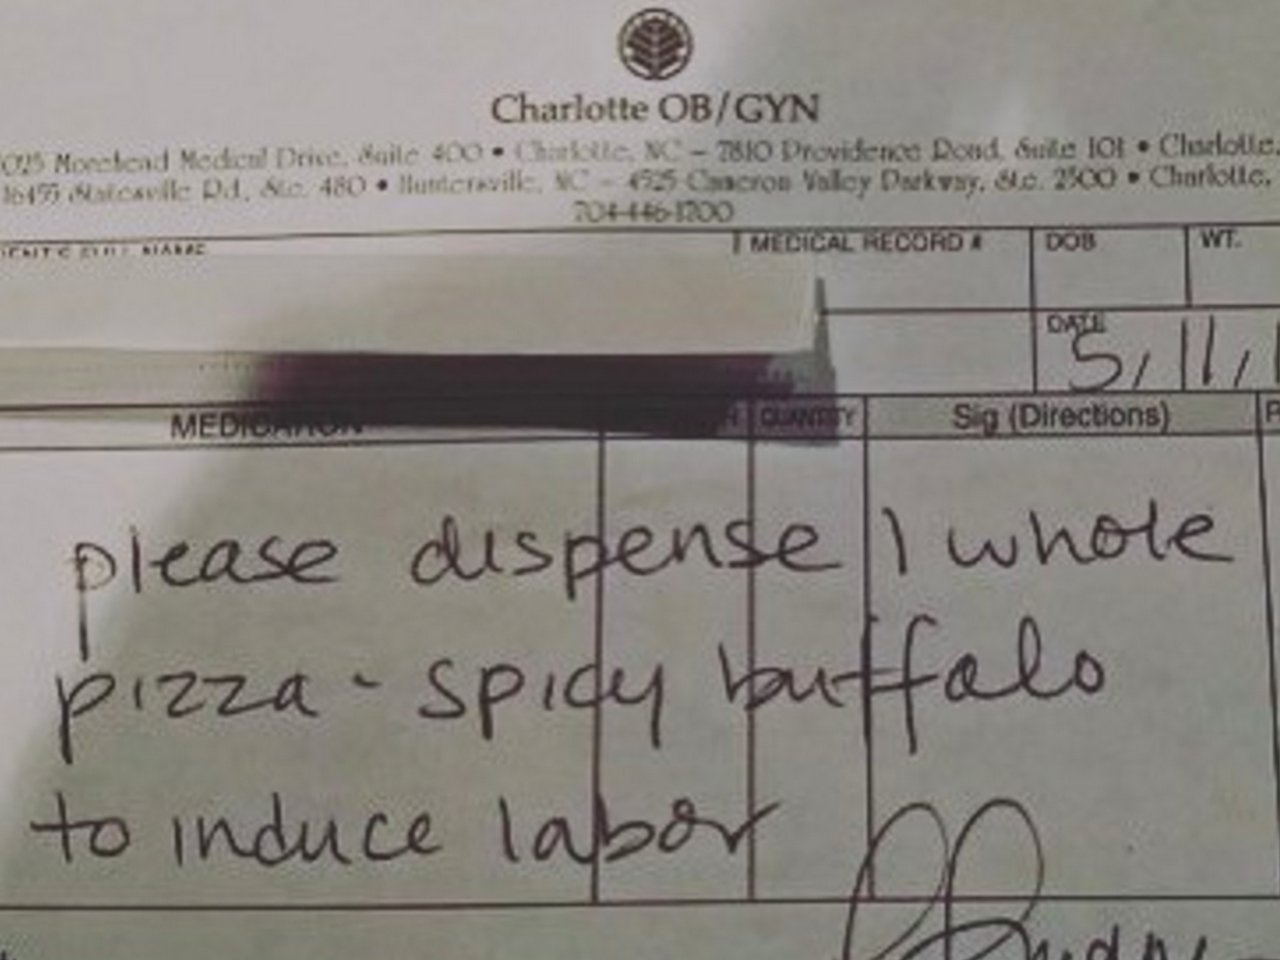 Prescription for the inducer pizza from an OB/GYN in North Carolina